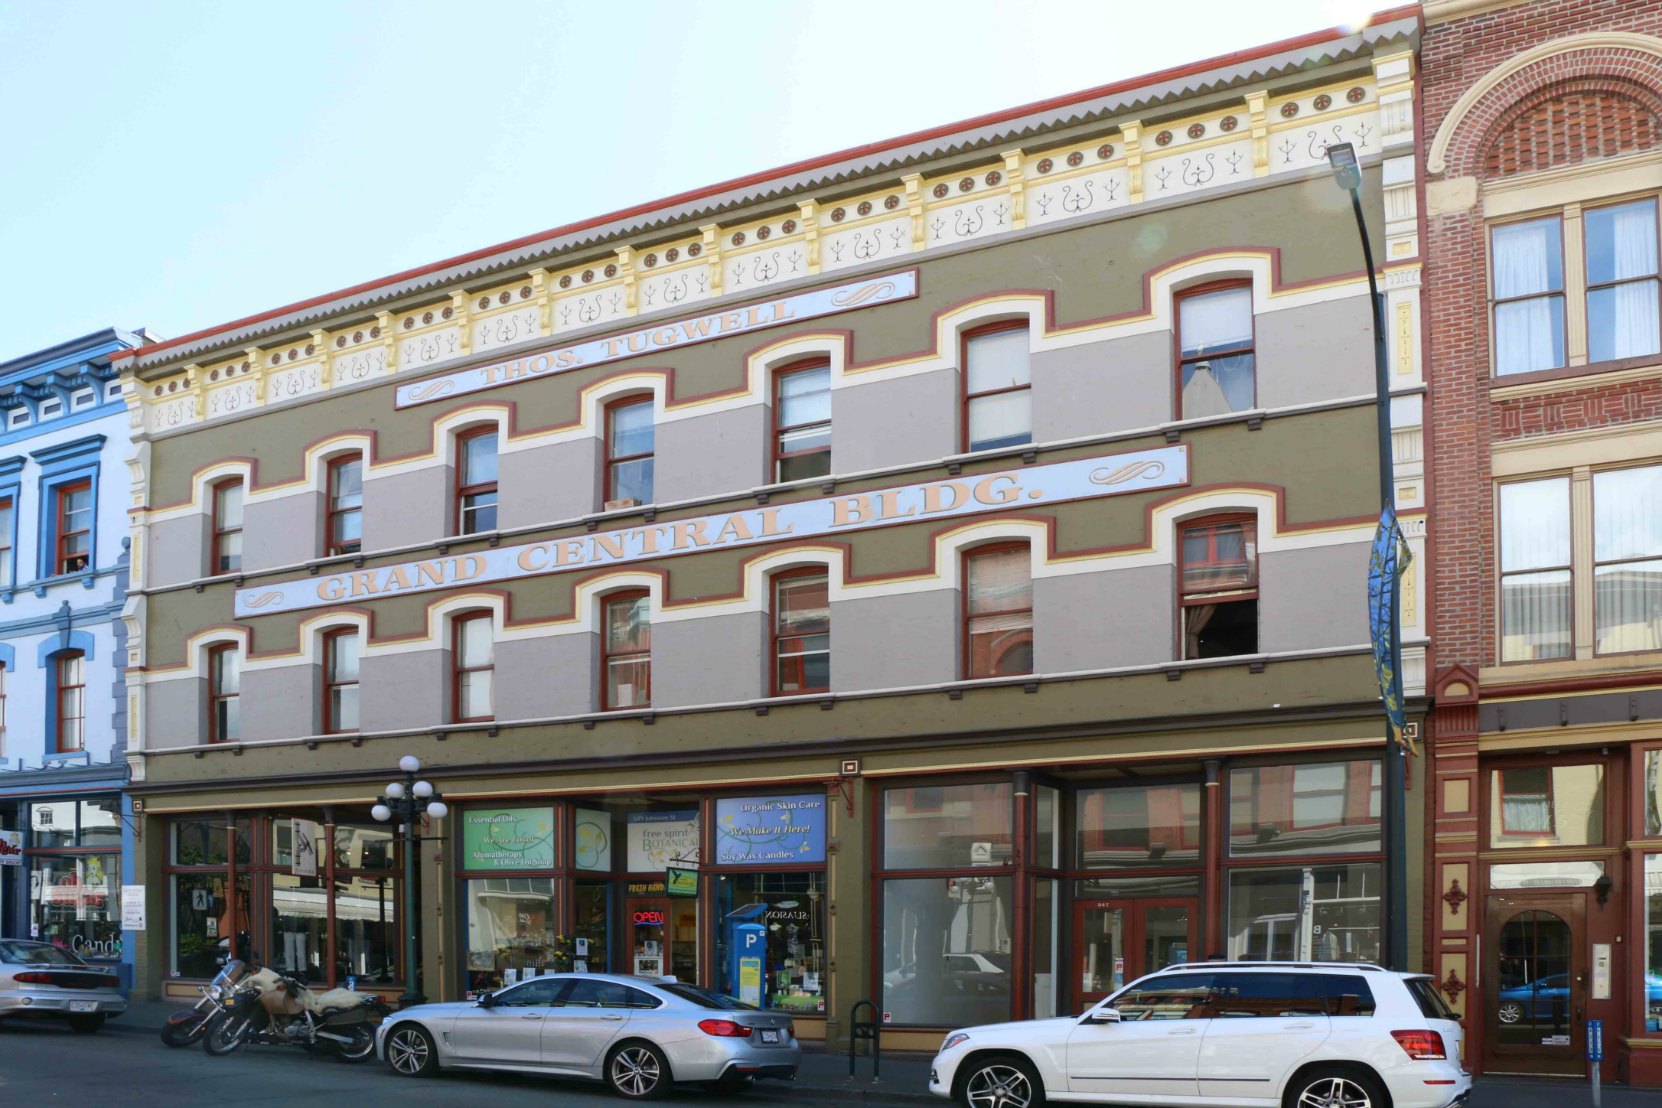 544-555 Johnson Street. Built in 1890 as the Colonial Hotel (photo by Victoria Online Sightseeing Tours)